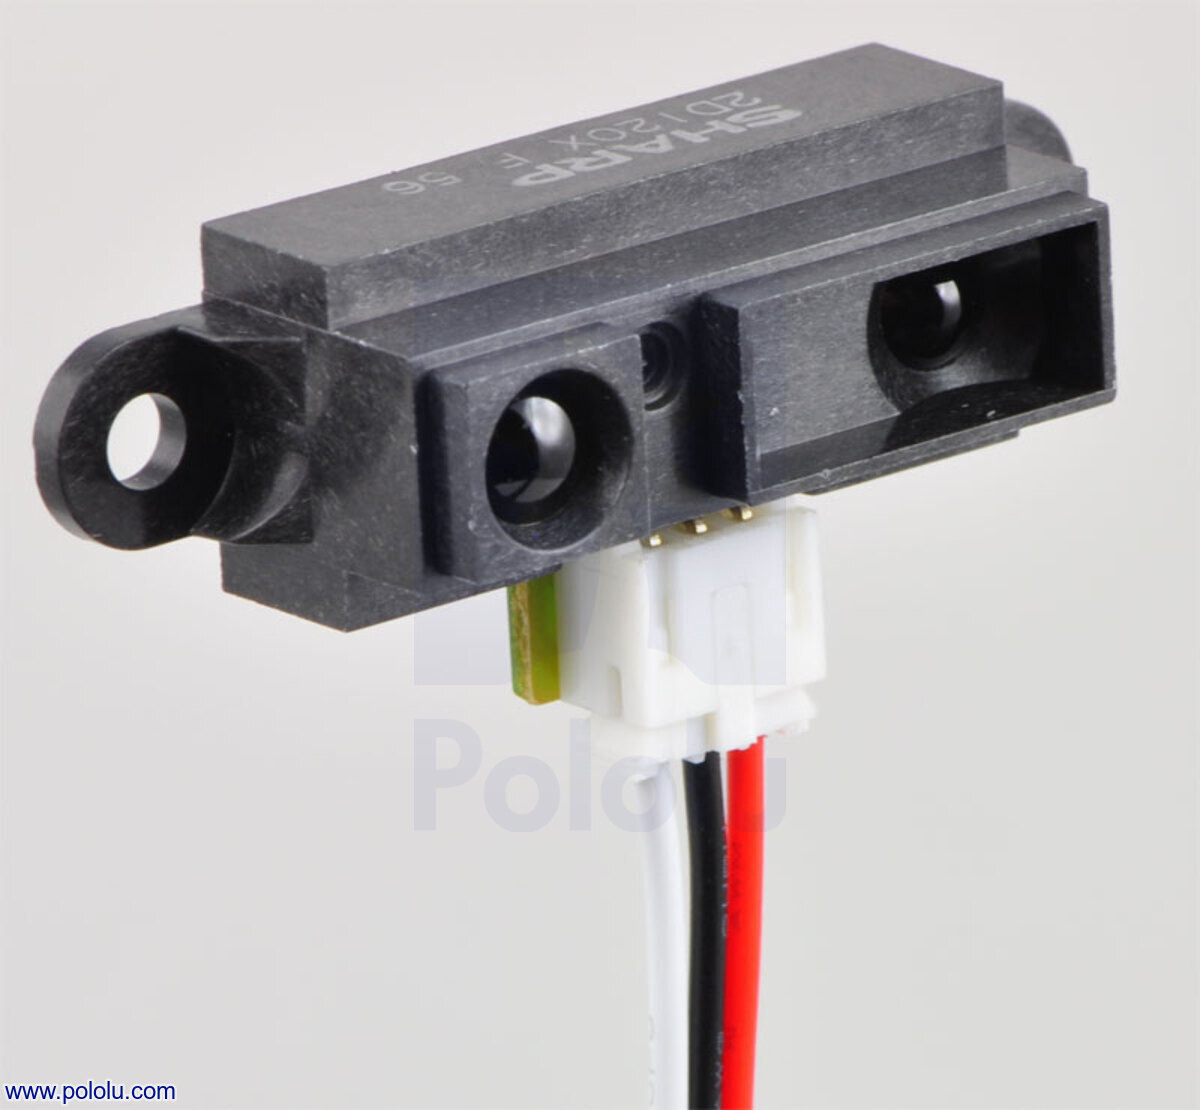 Infrared Proximity Sensor SHARP GP2Y0A41SK0F Range 4-30cm With Cable,0A41SK 